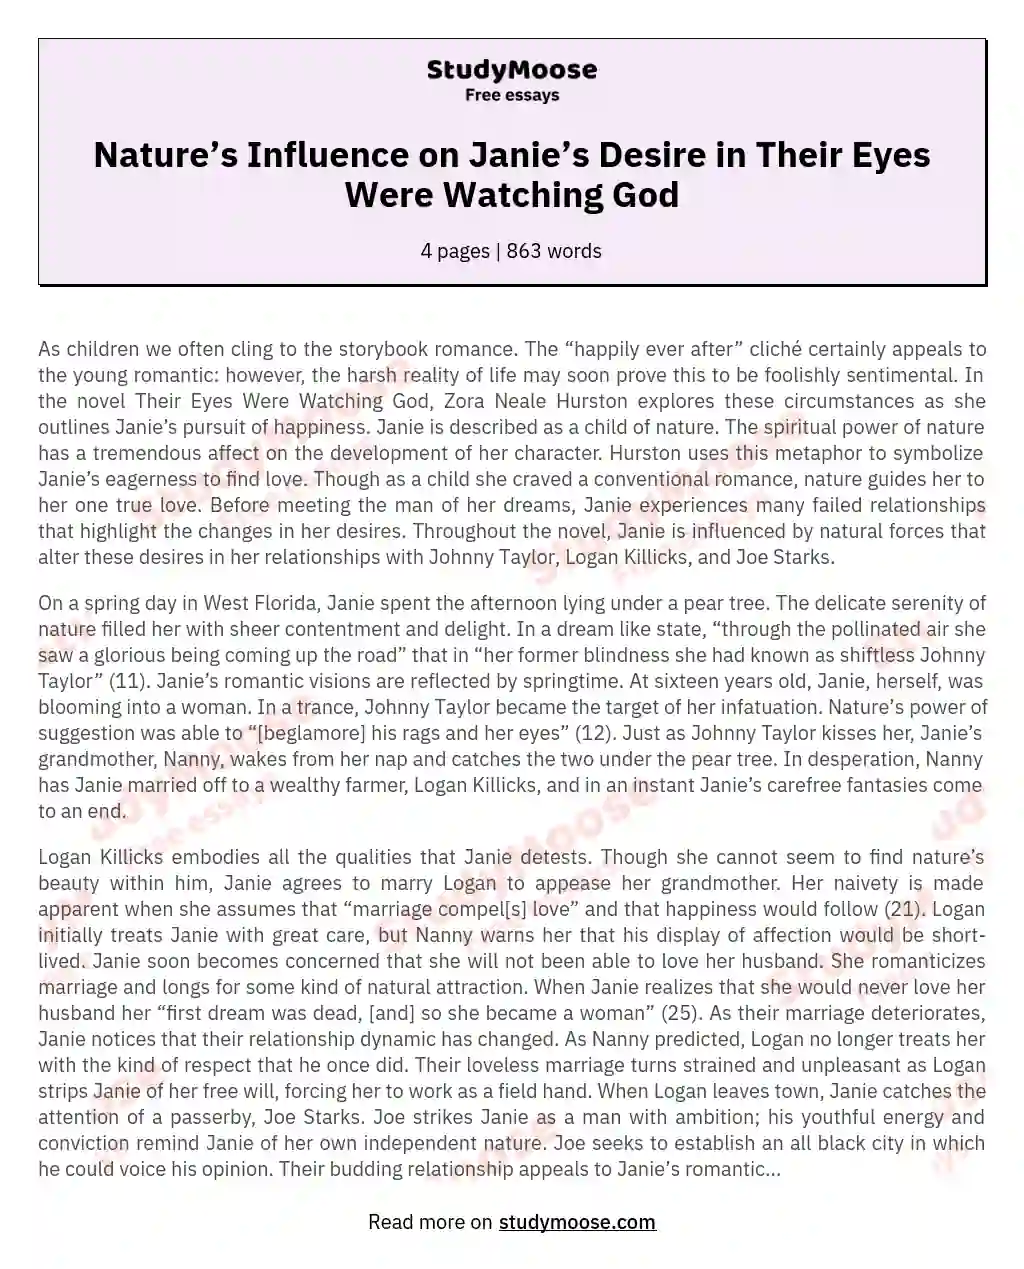 Nature’s Influence on Janie’s Desire in Their Eyes Were Watching God